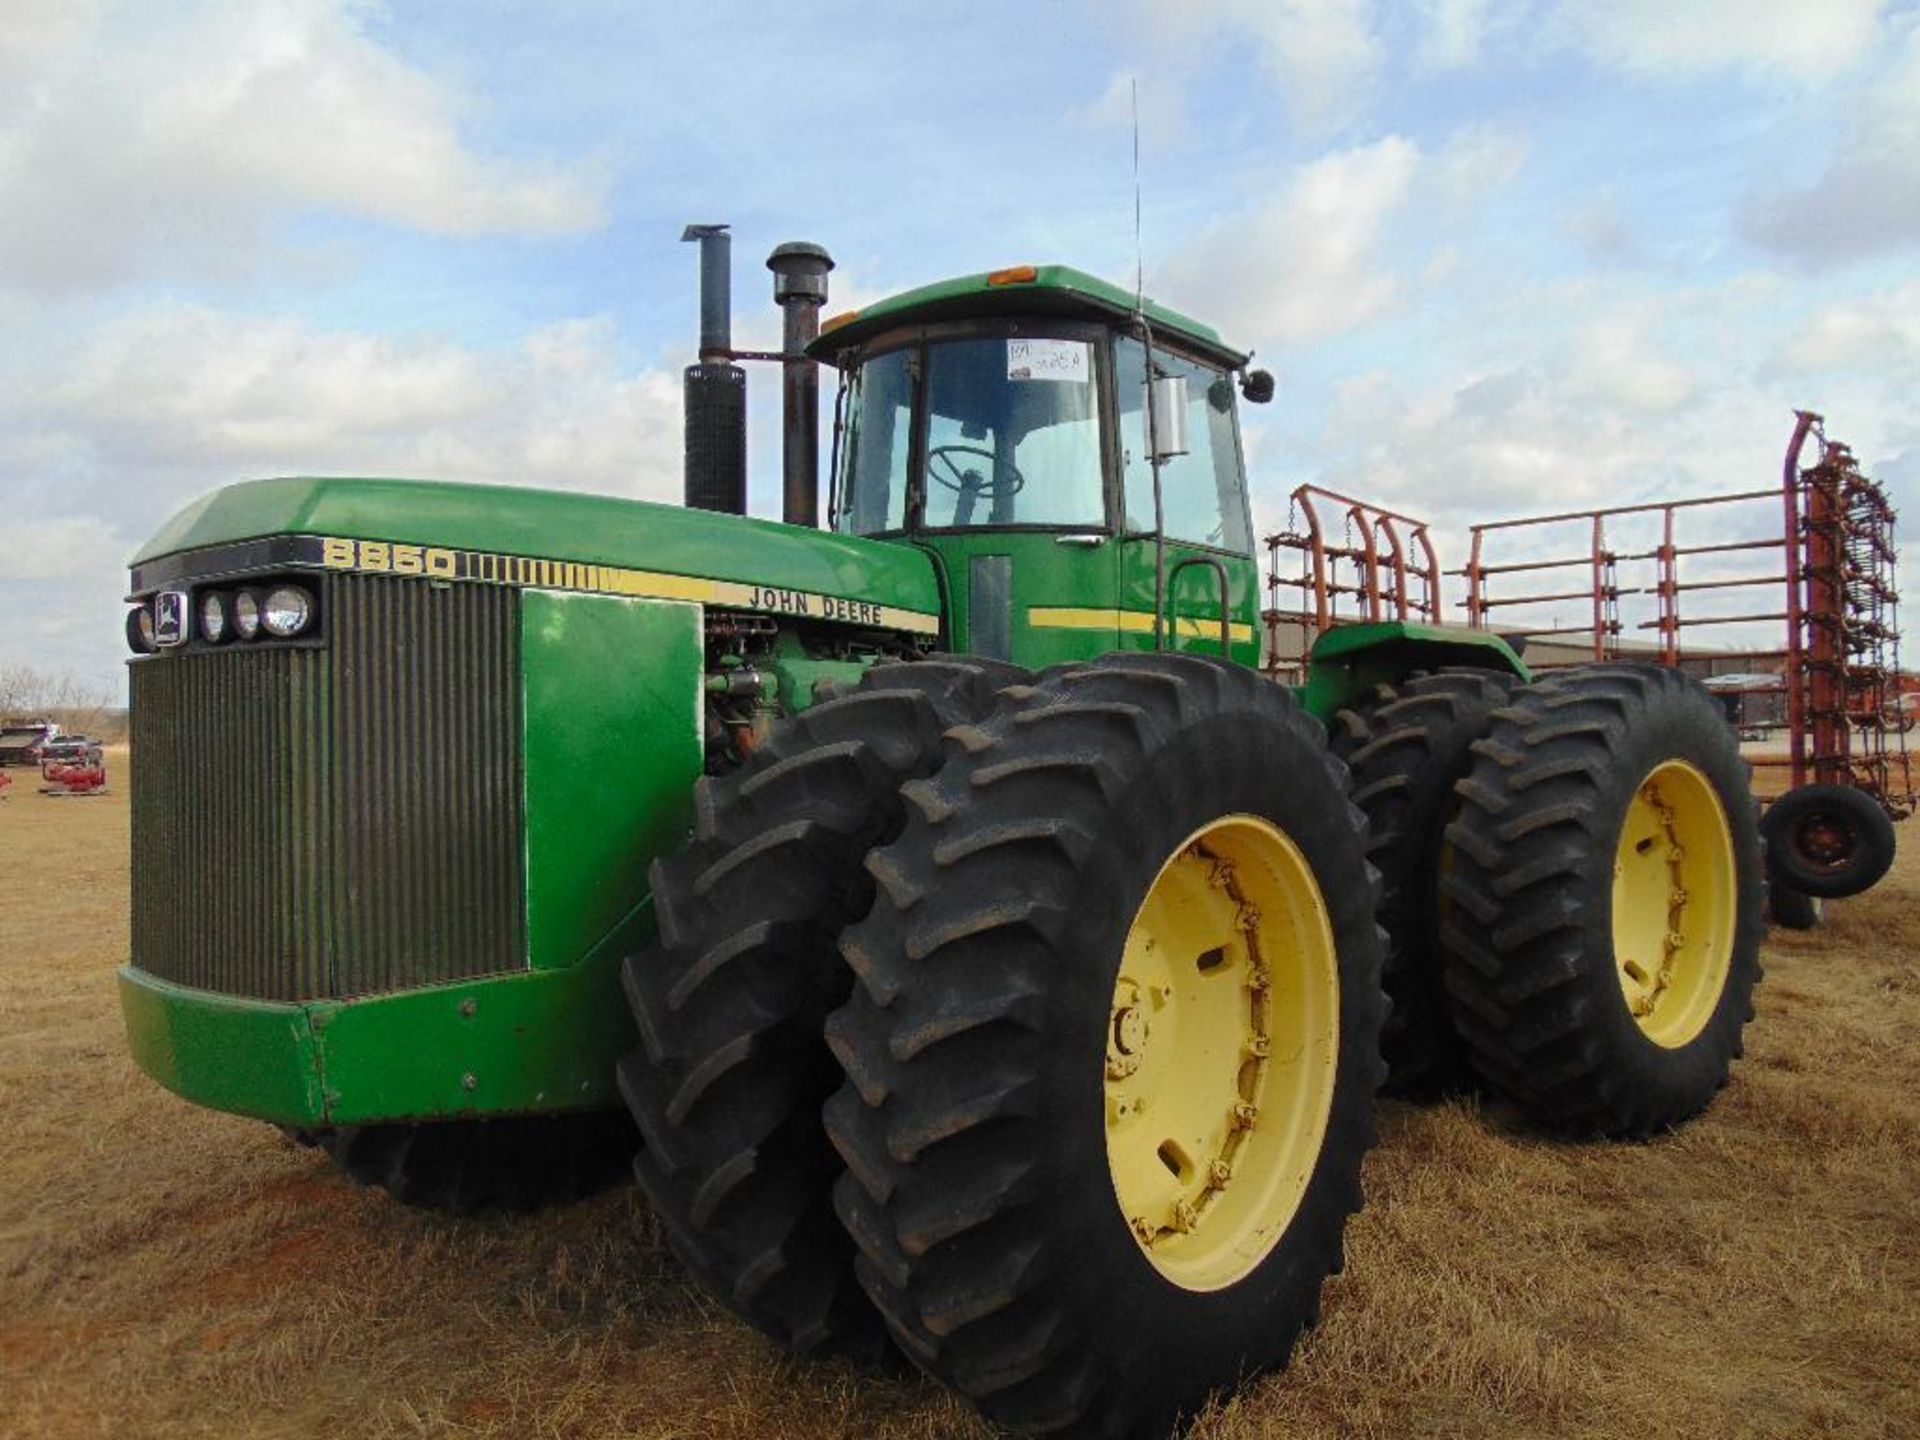 John Deere 8850 4x4 Farm Tractor, s/n h004199, cab, a/c, 4 hyd , duals, hour meter reads 04937 hrs, - Image 2 of 10